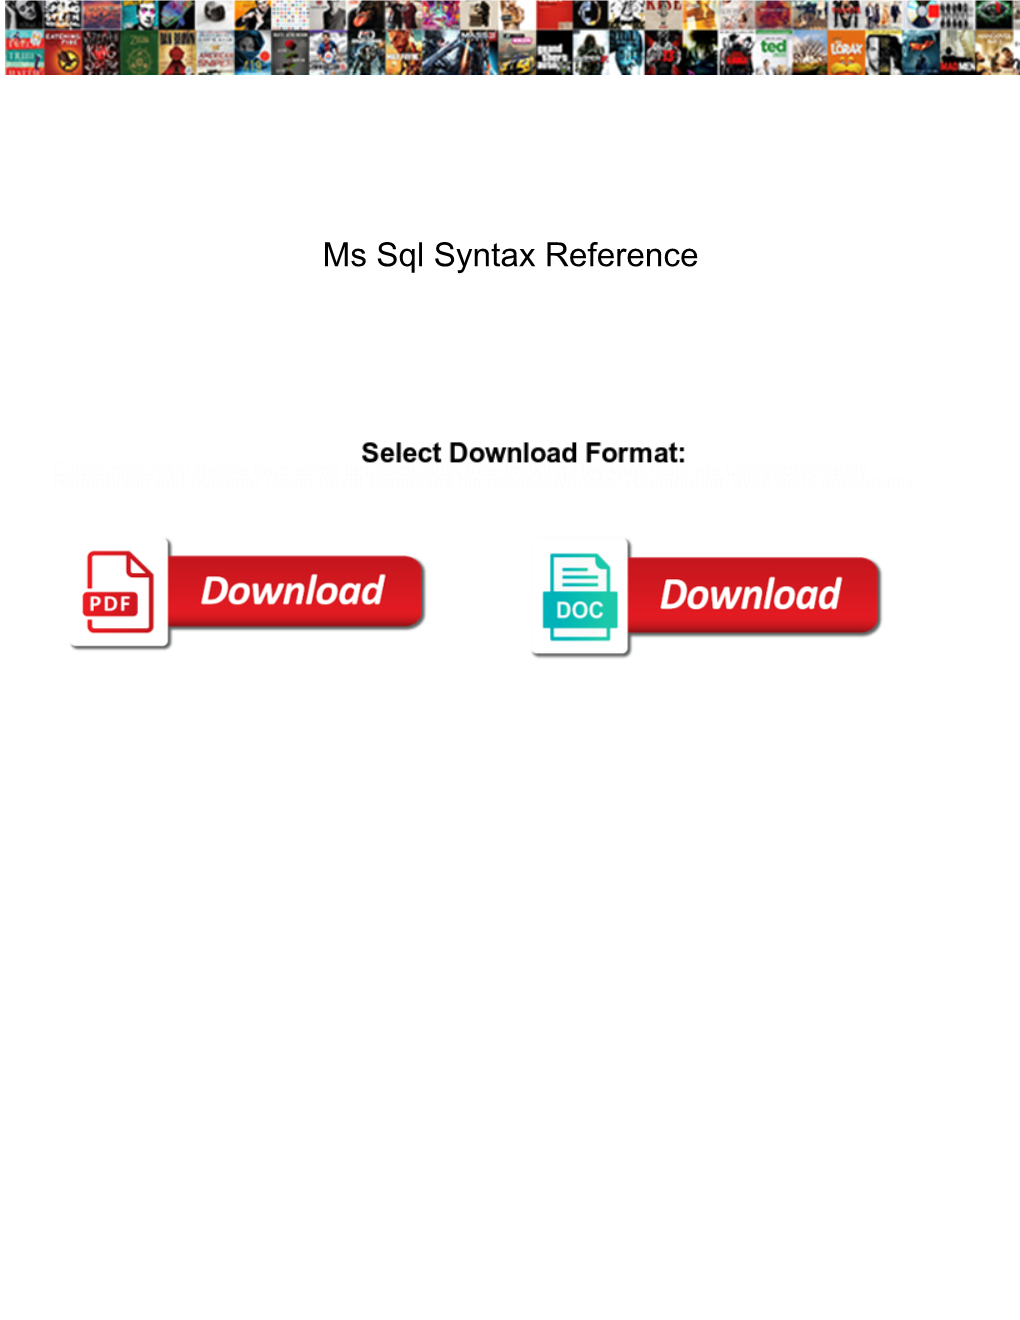 Ms Sql Syntax Reference